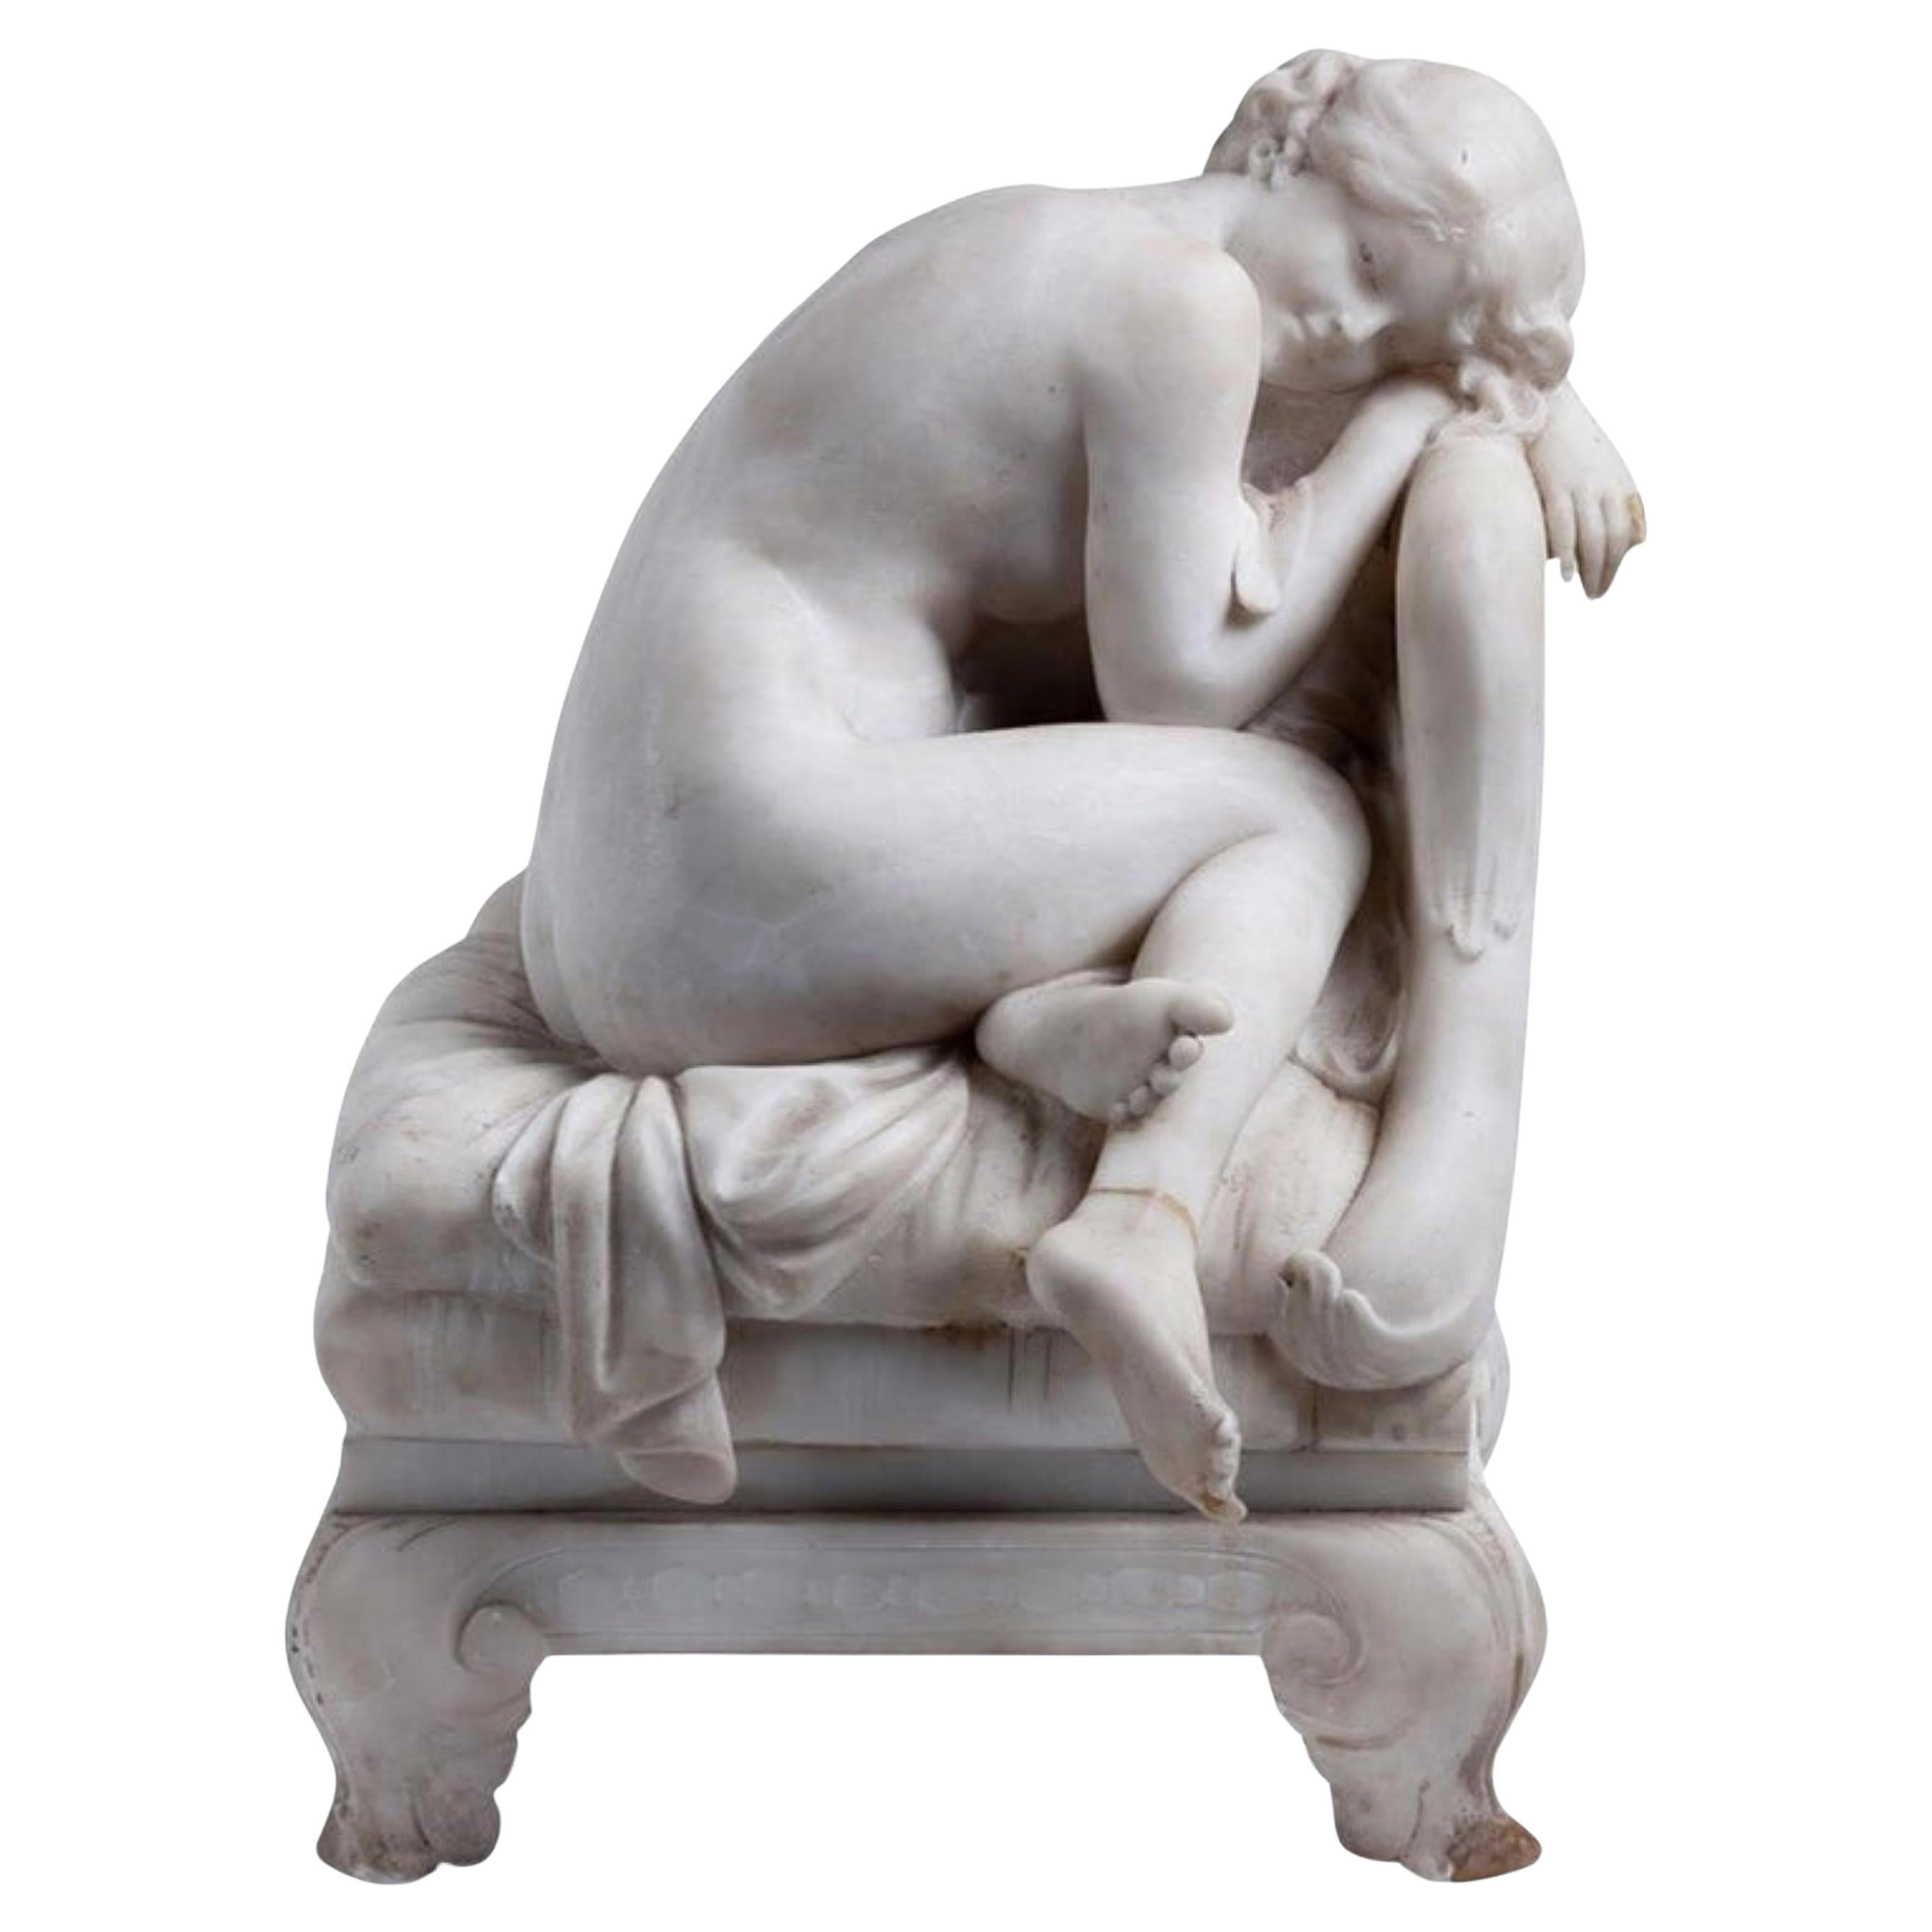 Umberto Stiaccini, 19th Century Italian White Marble Sculpture "Reclining Lady" For Sale